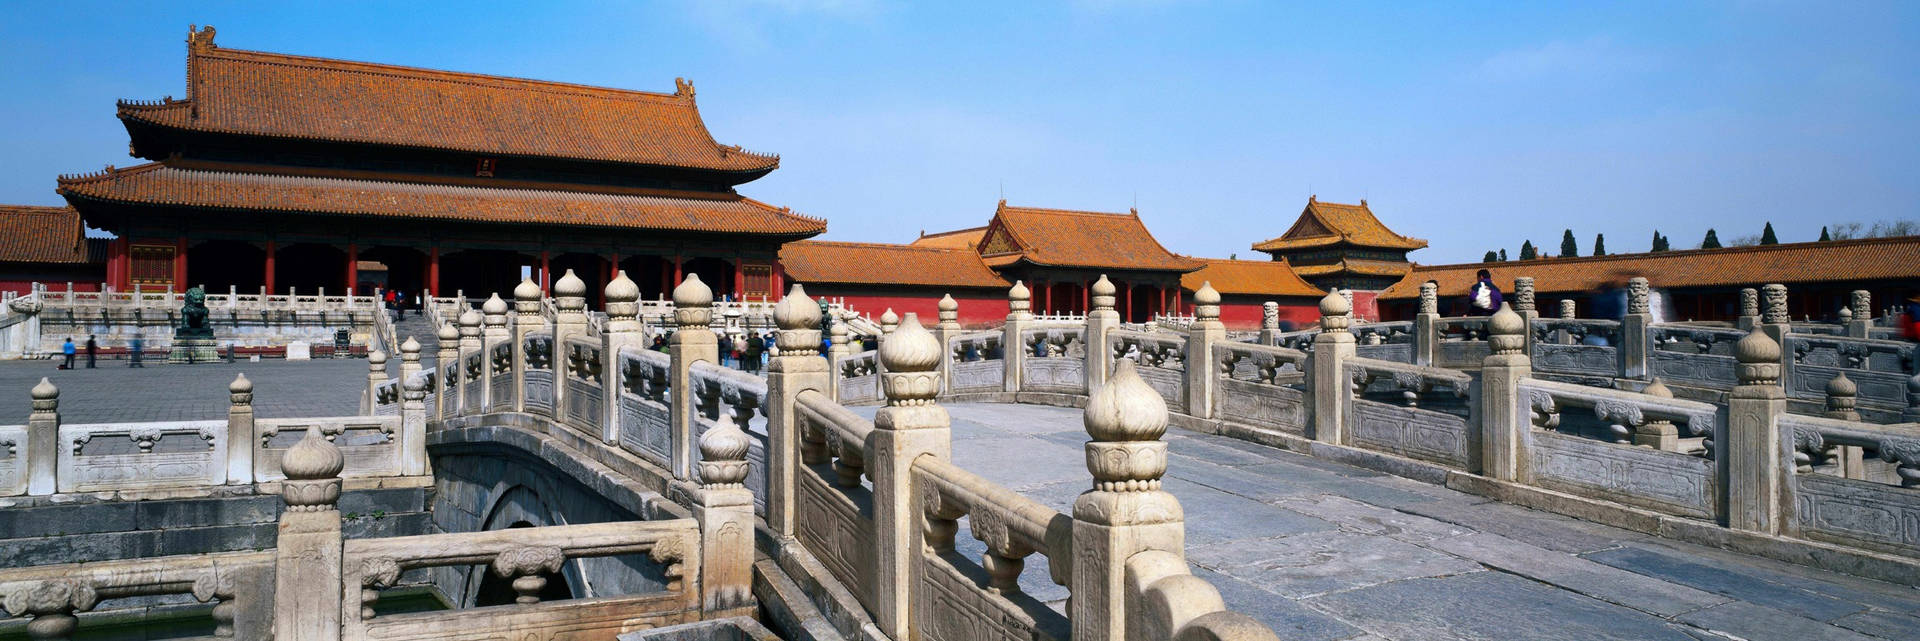 Palace Of Heavenly Purity Forbidden City Picture